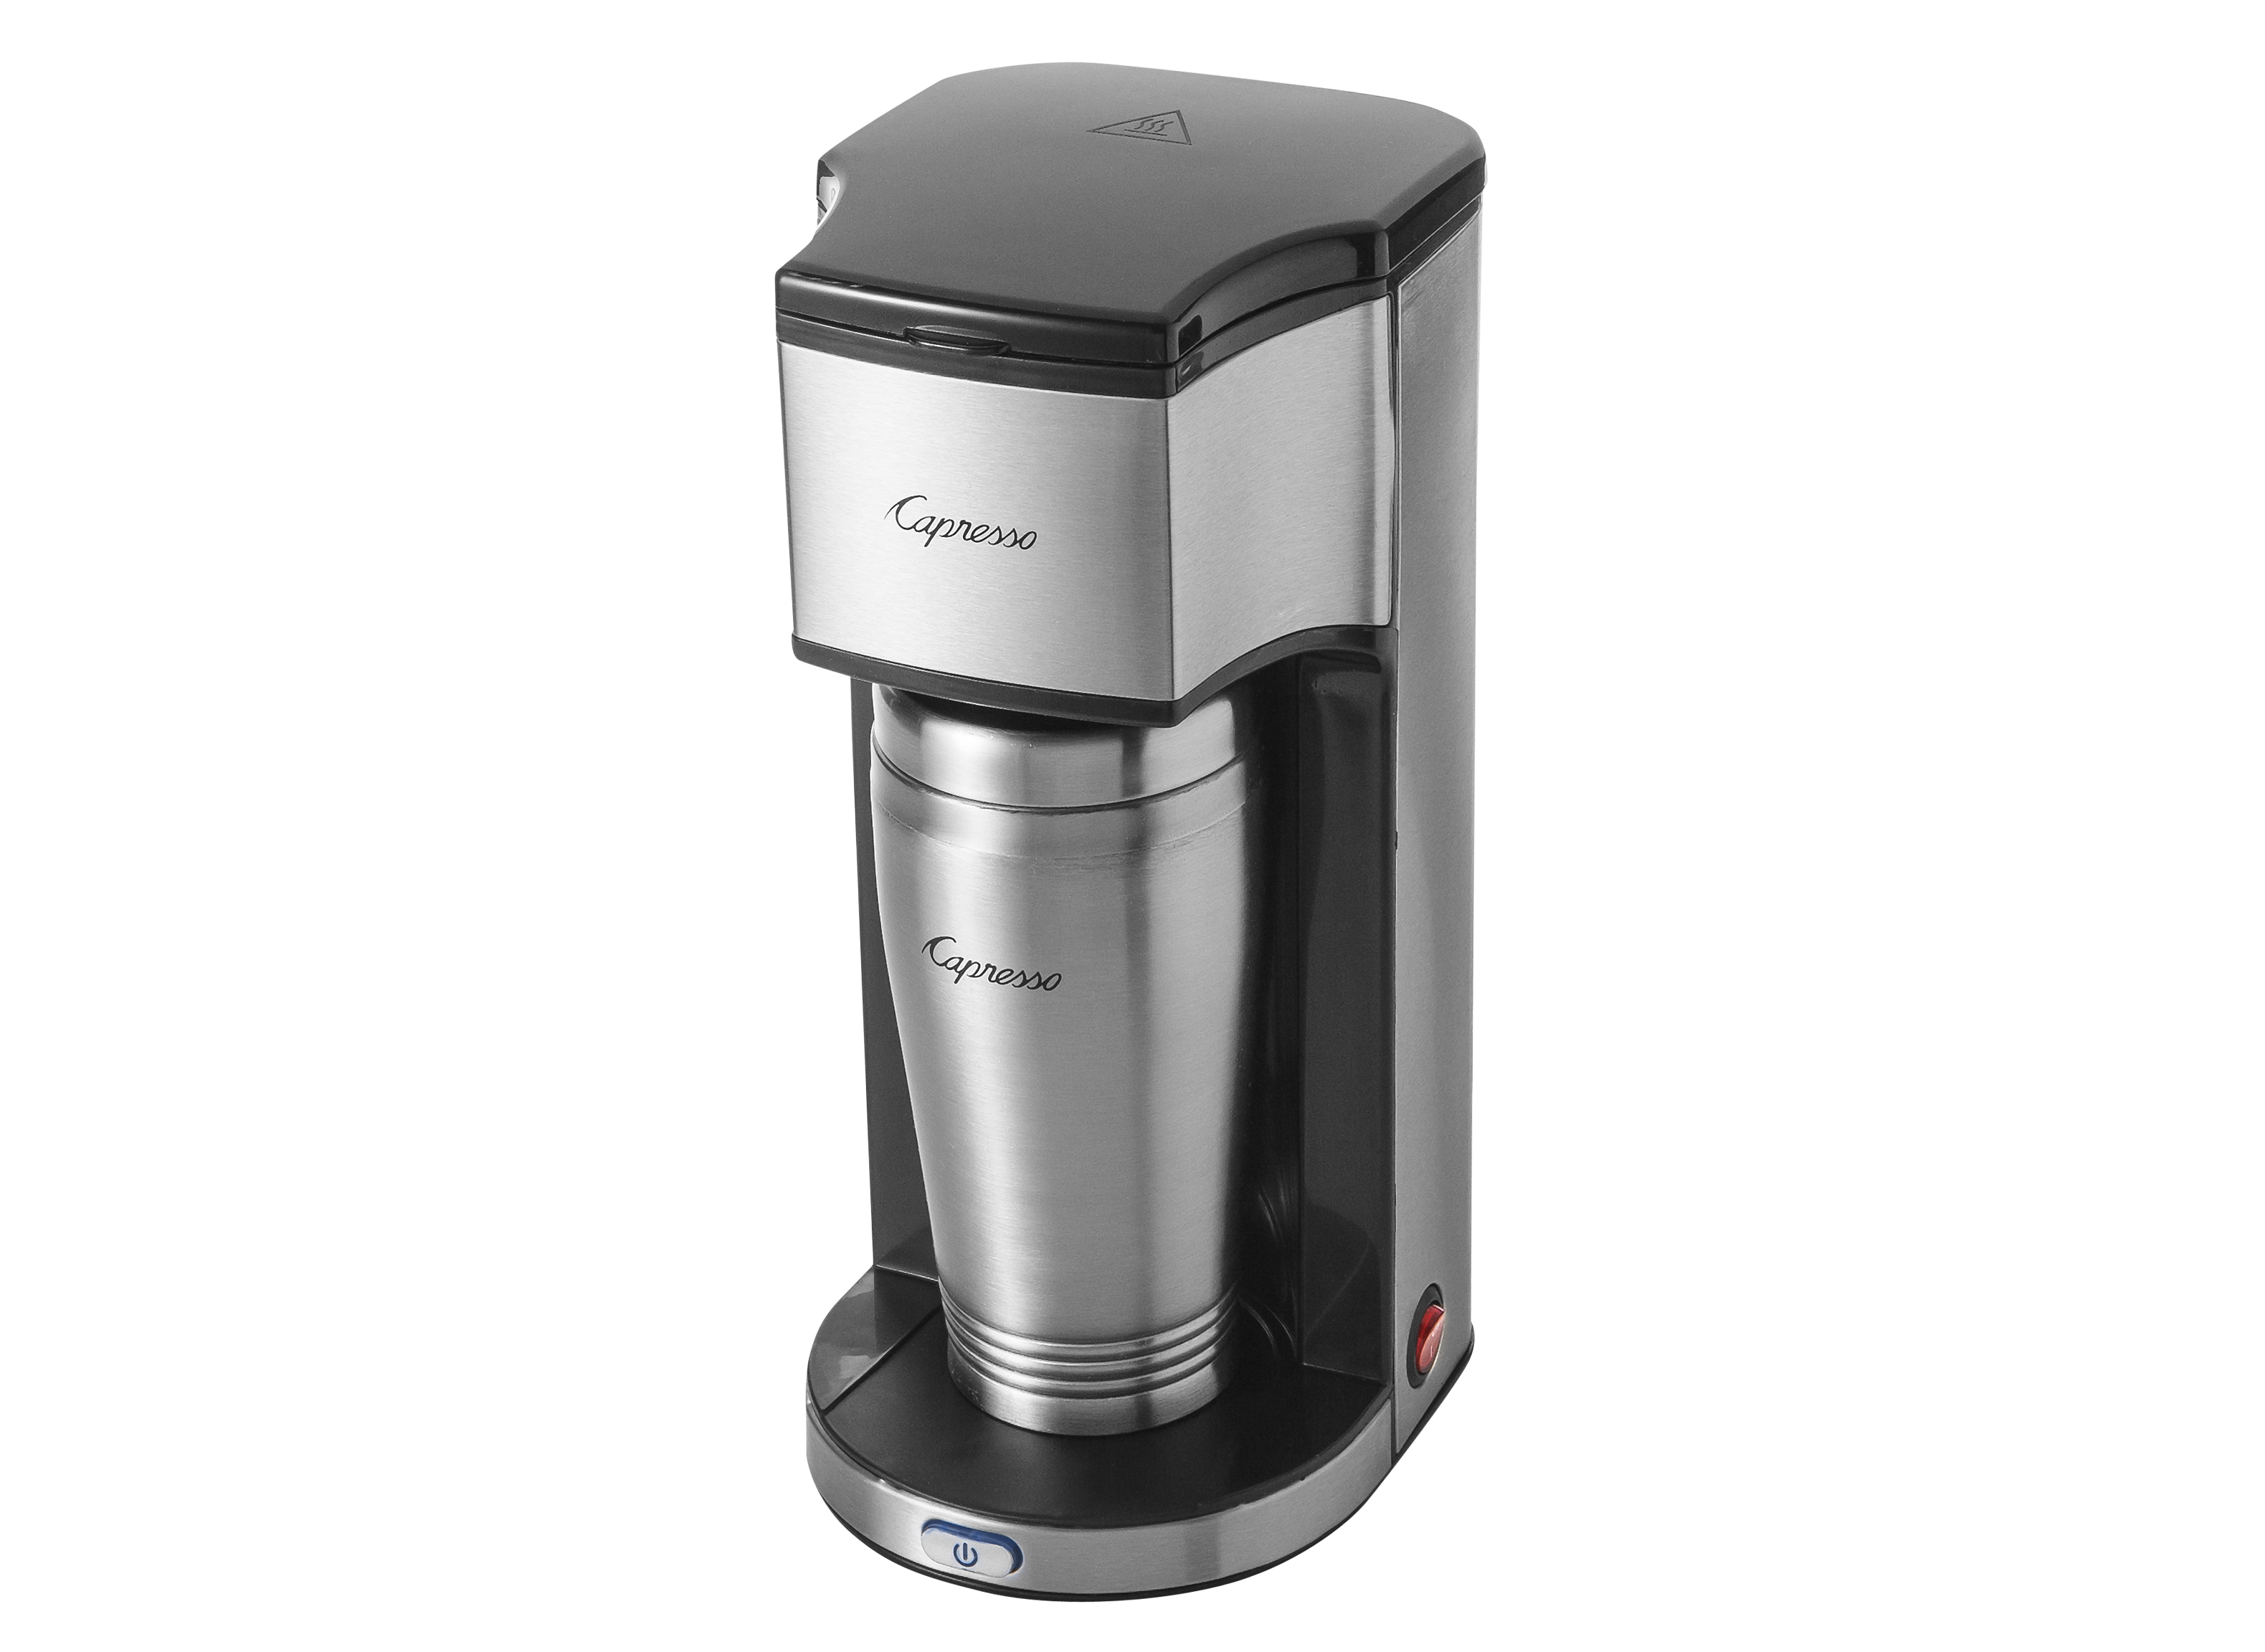 Capresso On-The-Go Personal 42505 Coffee Maker Review - Consumer Reports